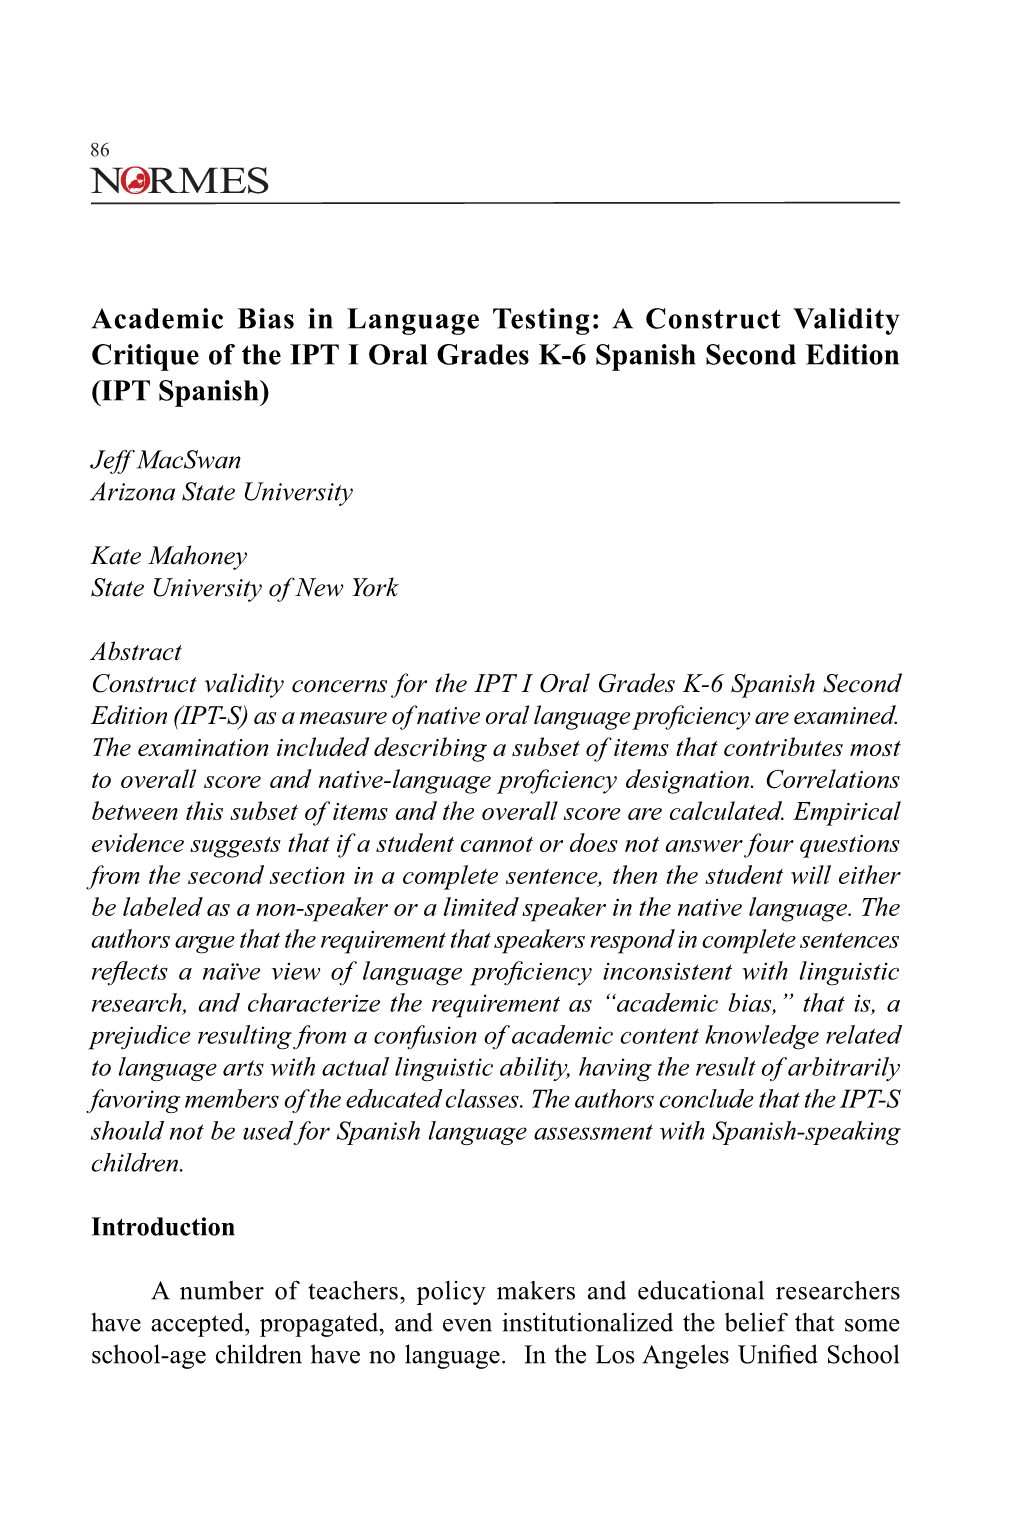 Academic Bias in Language Testing: a Construct Validity Critique of the IPT I Oral Grades K-6 Spanish Second Edition (IPT Spanish)